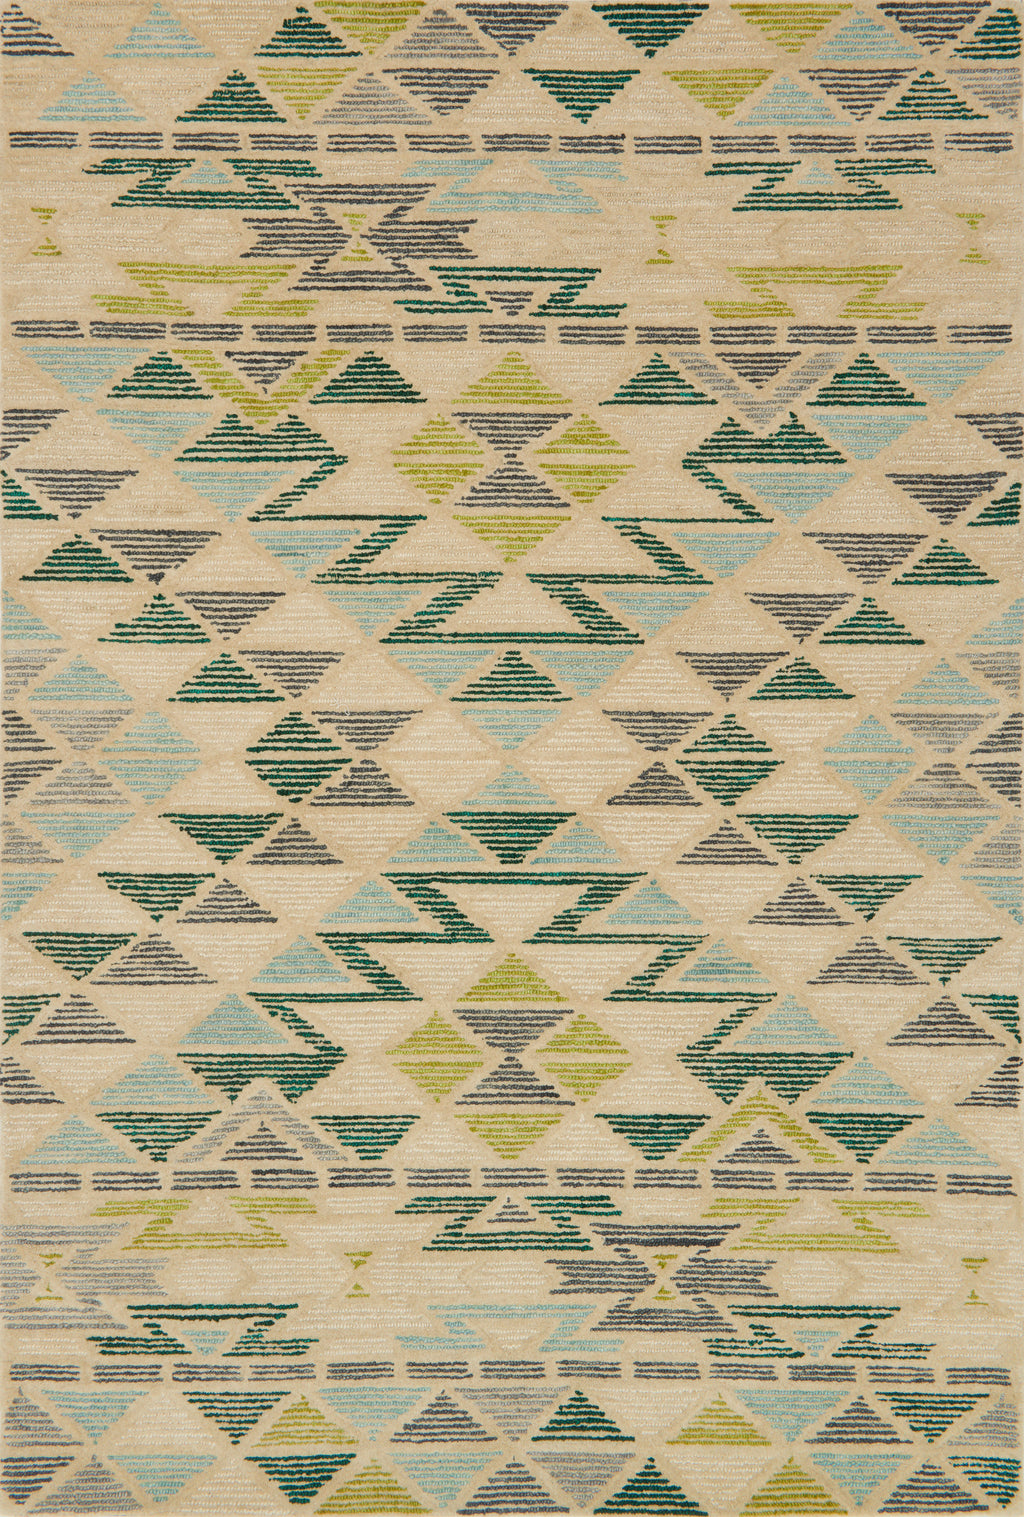 GEMOLOGY Collection Wool Rug  in  IVORY / AQUA Ivory Runner Hand-Tufted Wool